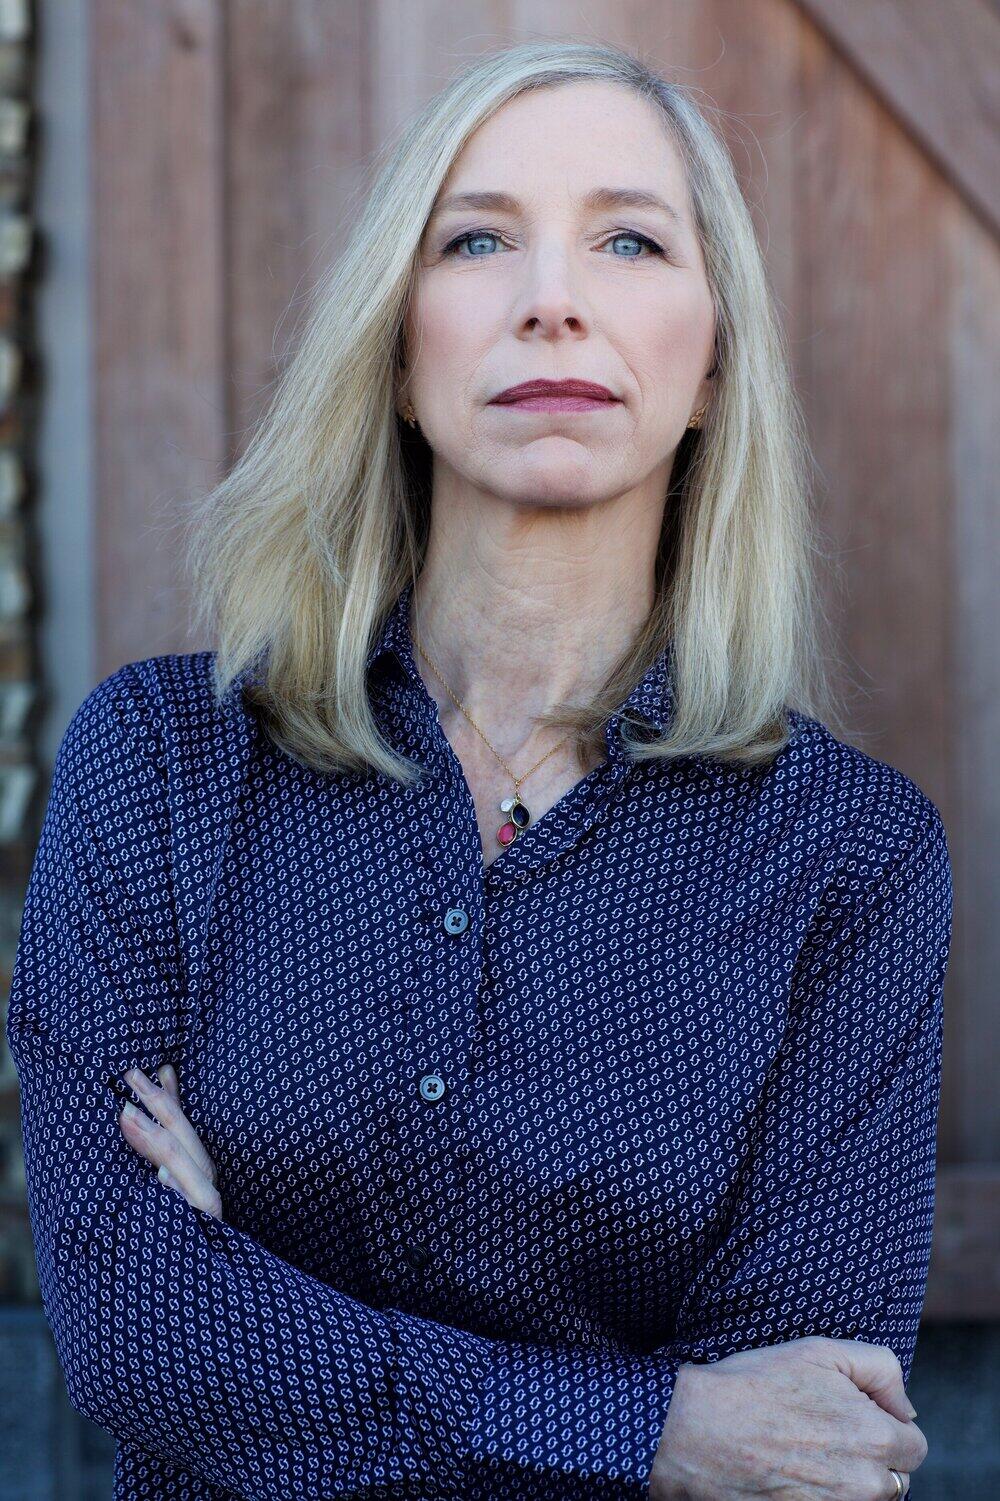 Katherine Schweit, a career Federal Bureau of Investigation Special Agent, expert on mass shootings and author of “Stop The Killing: How To End The Mass Shooting Crisis” will be the next lecturer in the Sonoma Speaker Series.